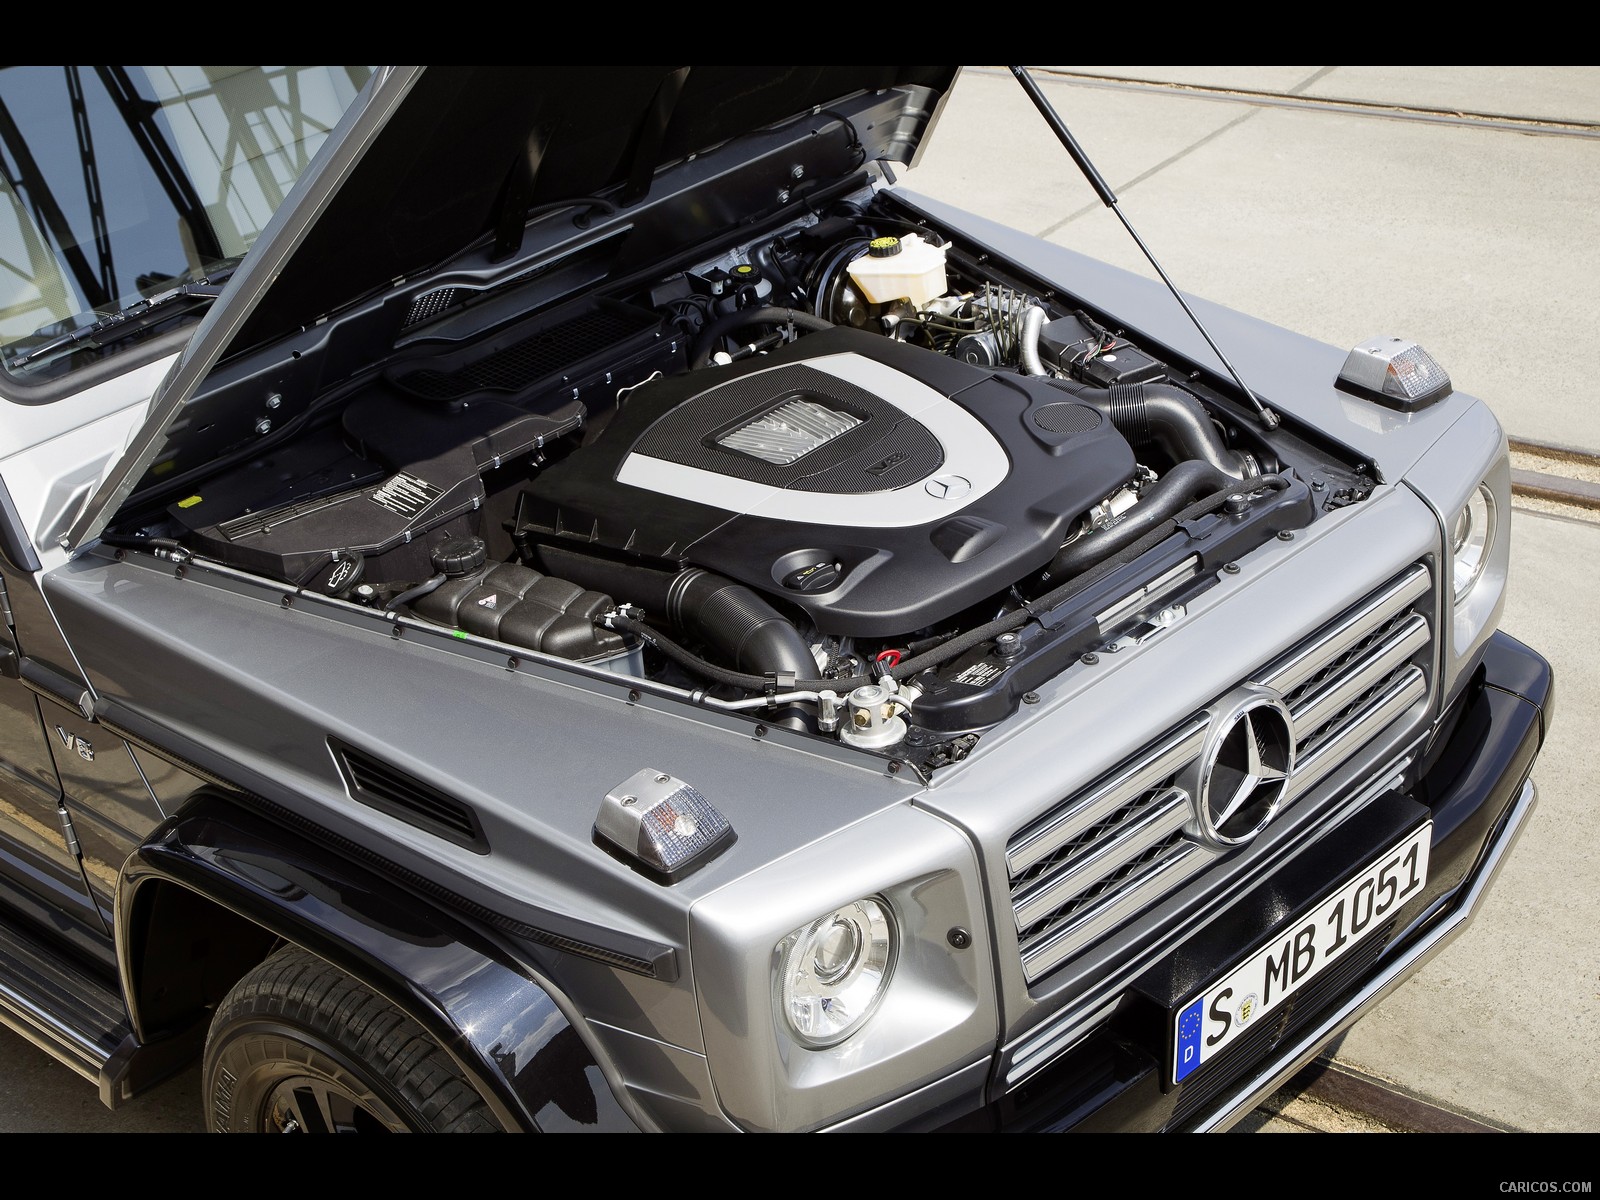 Mercedes-Benz G-Class "Edition Select" (2012)  - Engine, #9 of 13